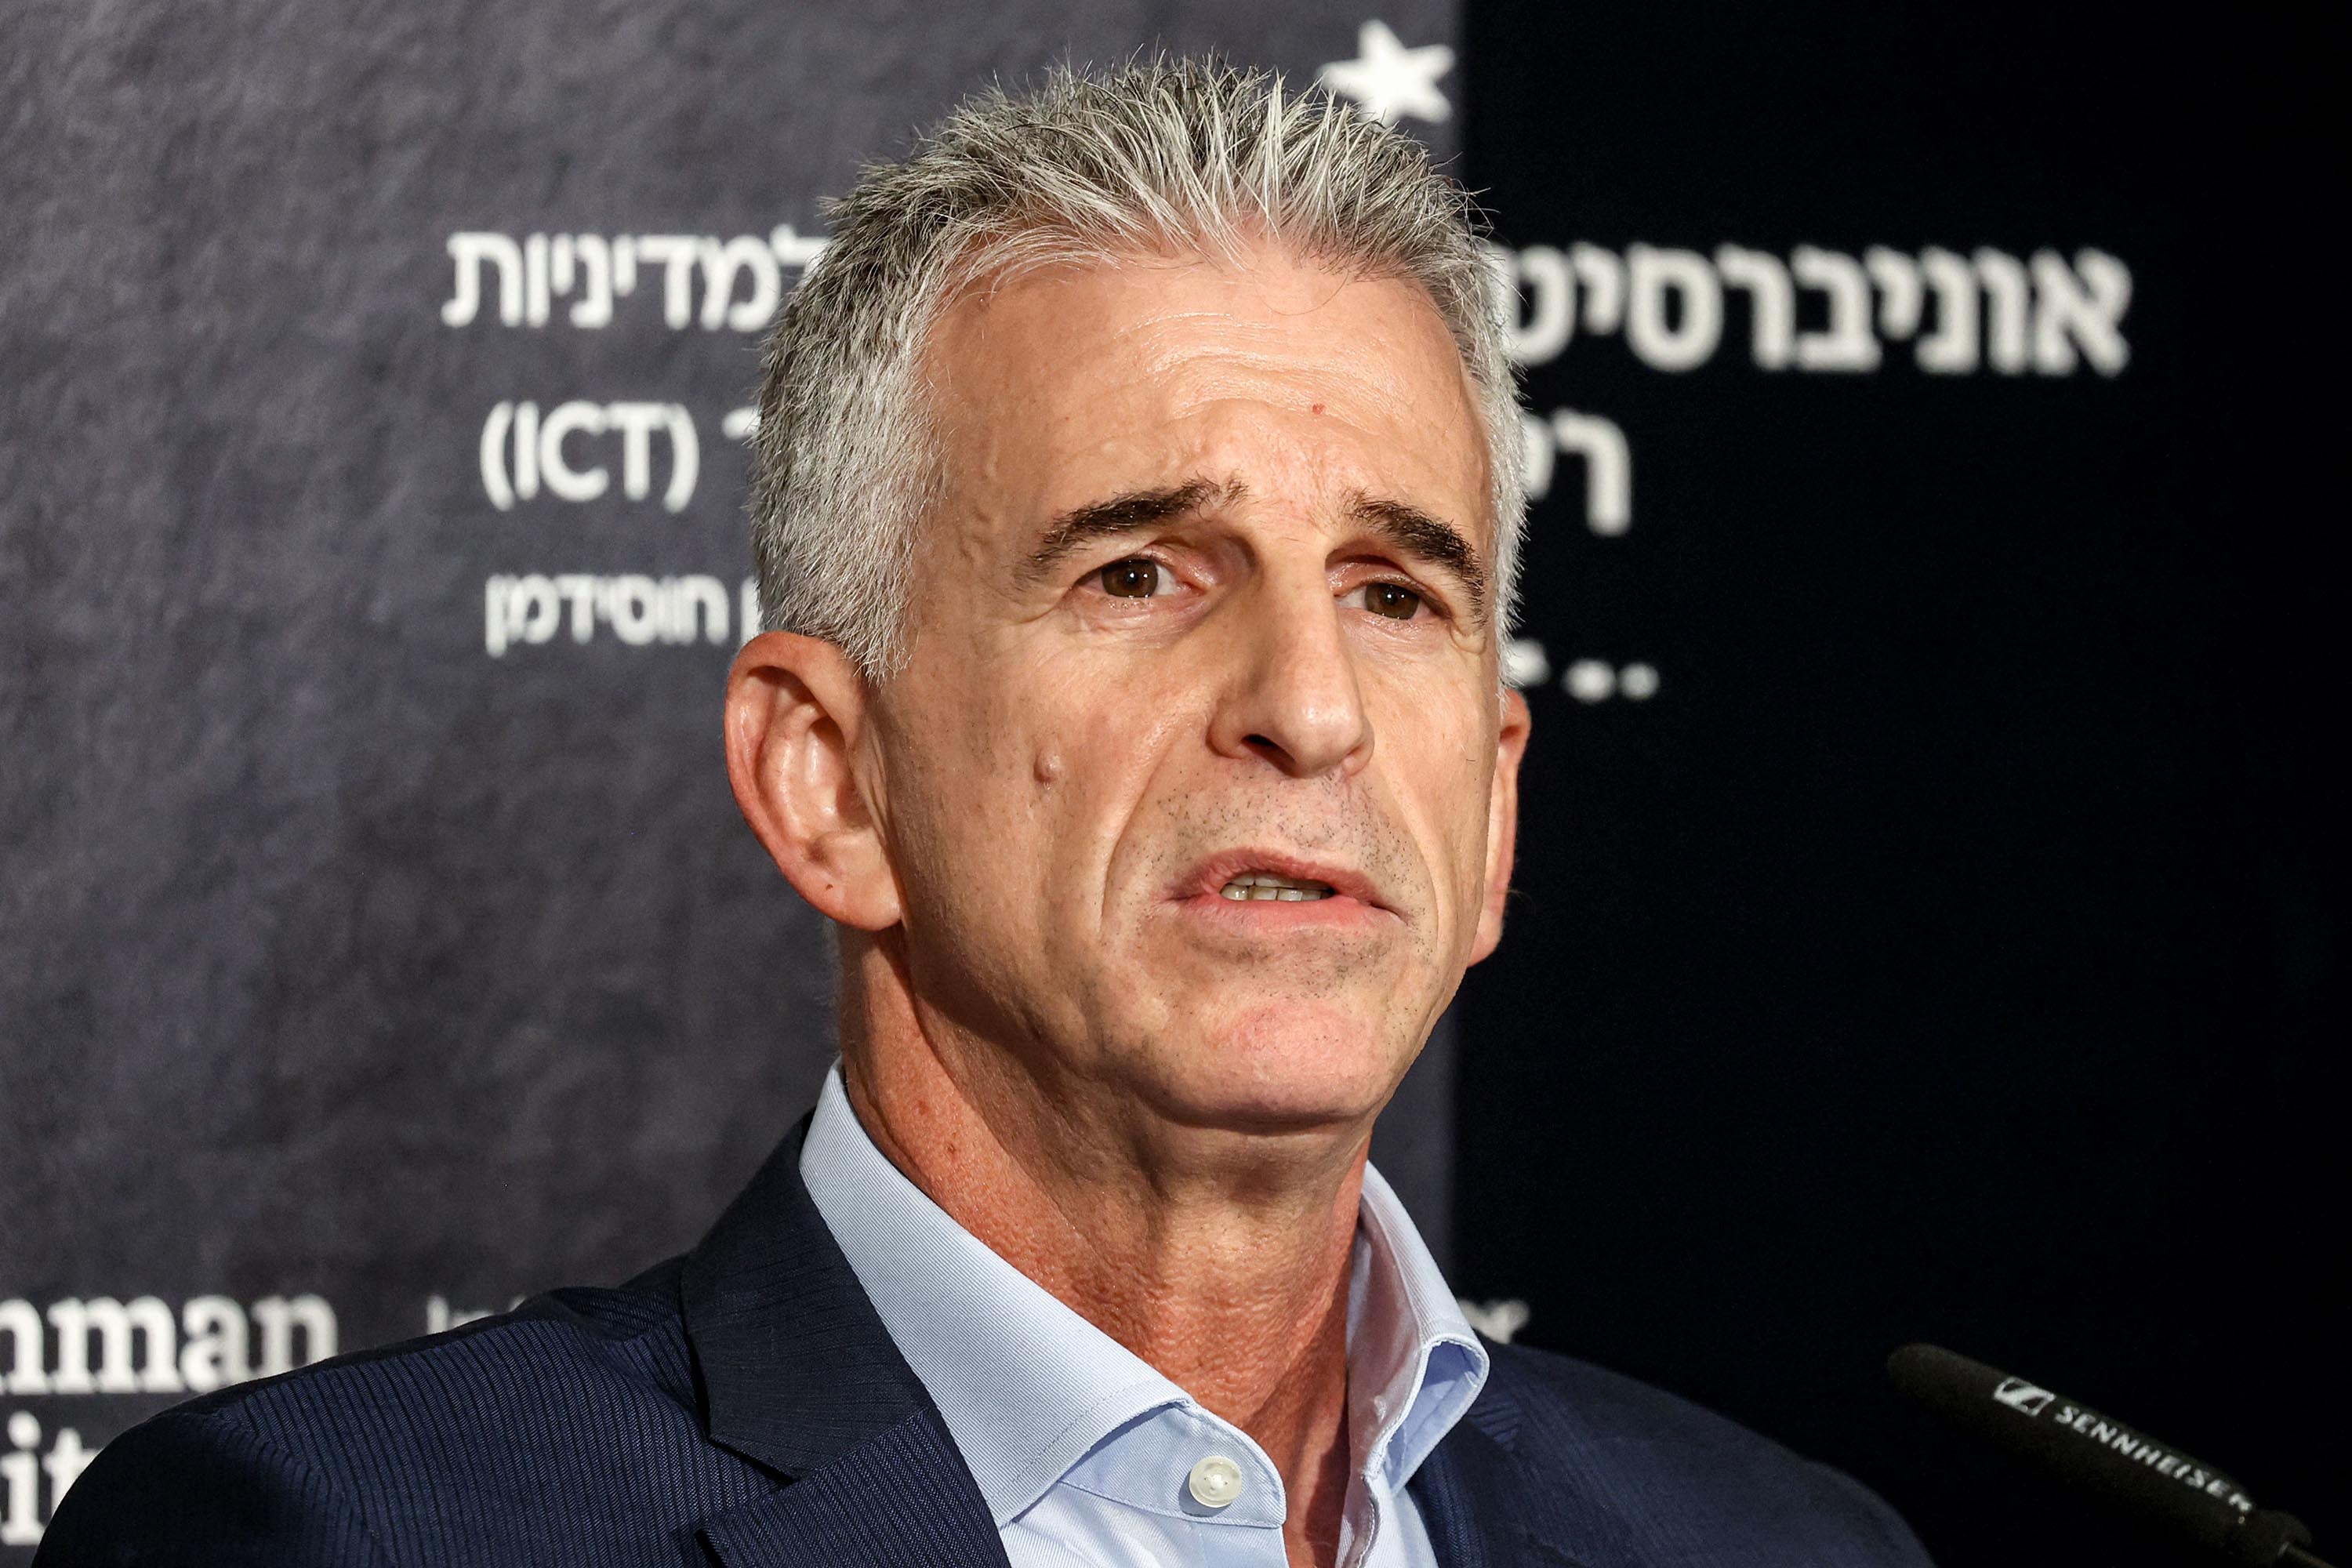 Israel's Mossad Director David Barnea is pictured during an event in Herzliya, Israel, on September 10. 